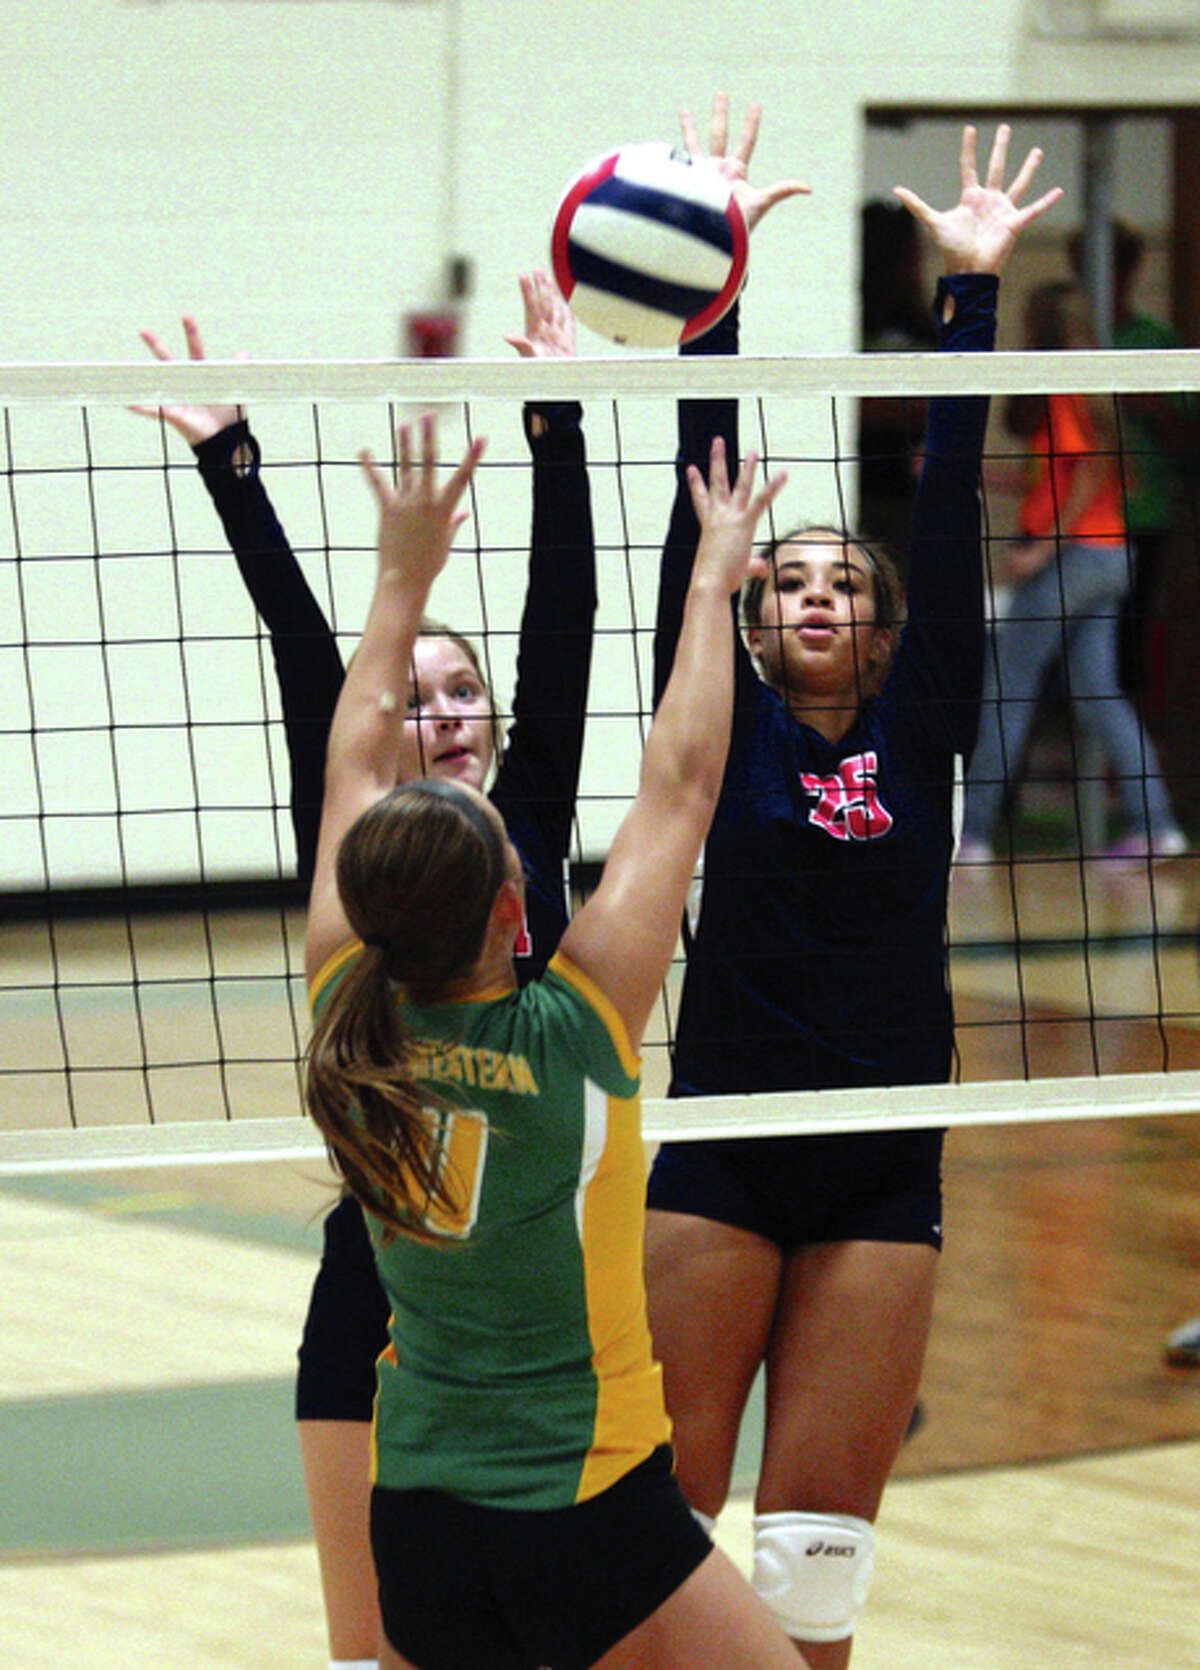 Southwestern’s Jenna Moore (front) pushes the ball past the double block put up by Carlinville’s Sydney Bates (left) and Anna Chew (right) during a SCC match Sept. 15 in Piasa. The Piasa Birds and Cavaliers meet for a fourth time — Southwestern won two of the three previous matches — on Thursday for the championship of the Carlinville Class 2A Regional.